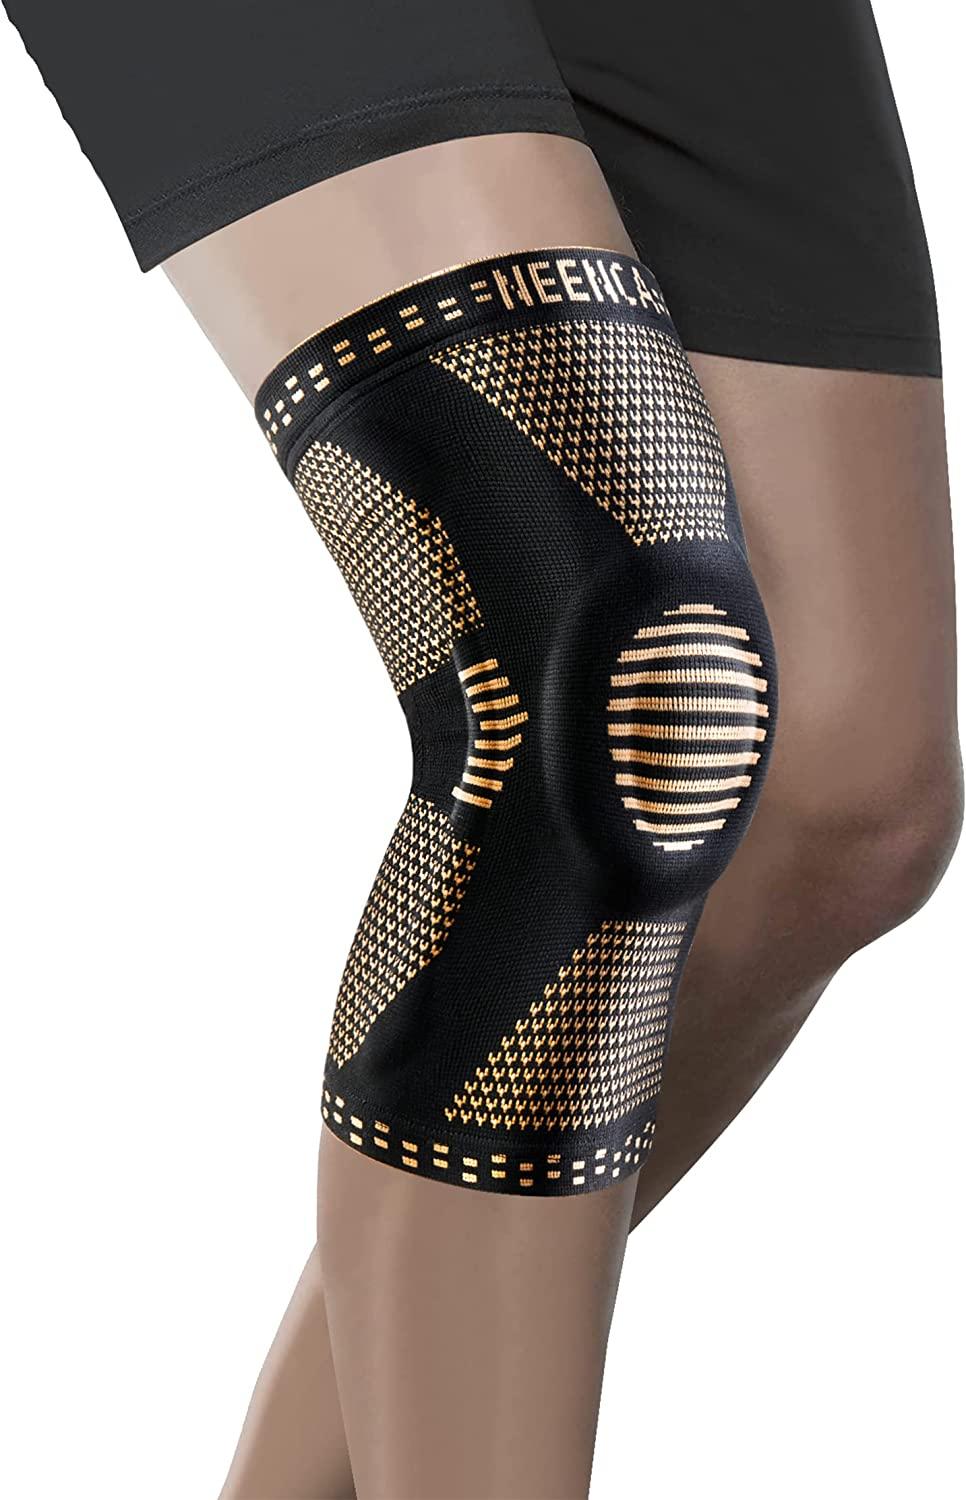 Professional Knee Brace, Compression Knee Sleeve with Patella Gel Pad &  Side Stabilizers, Knee Support Bandage for Pain Relief, Medical Knee Pad